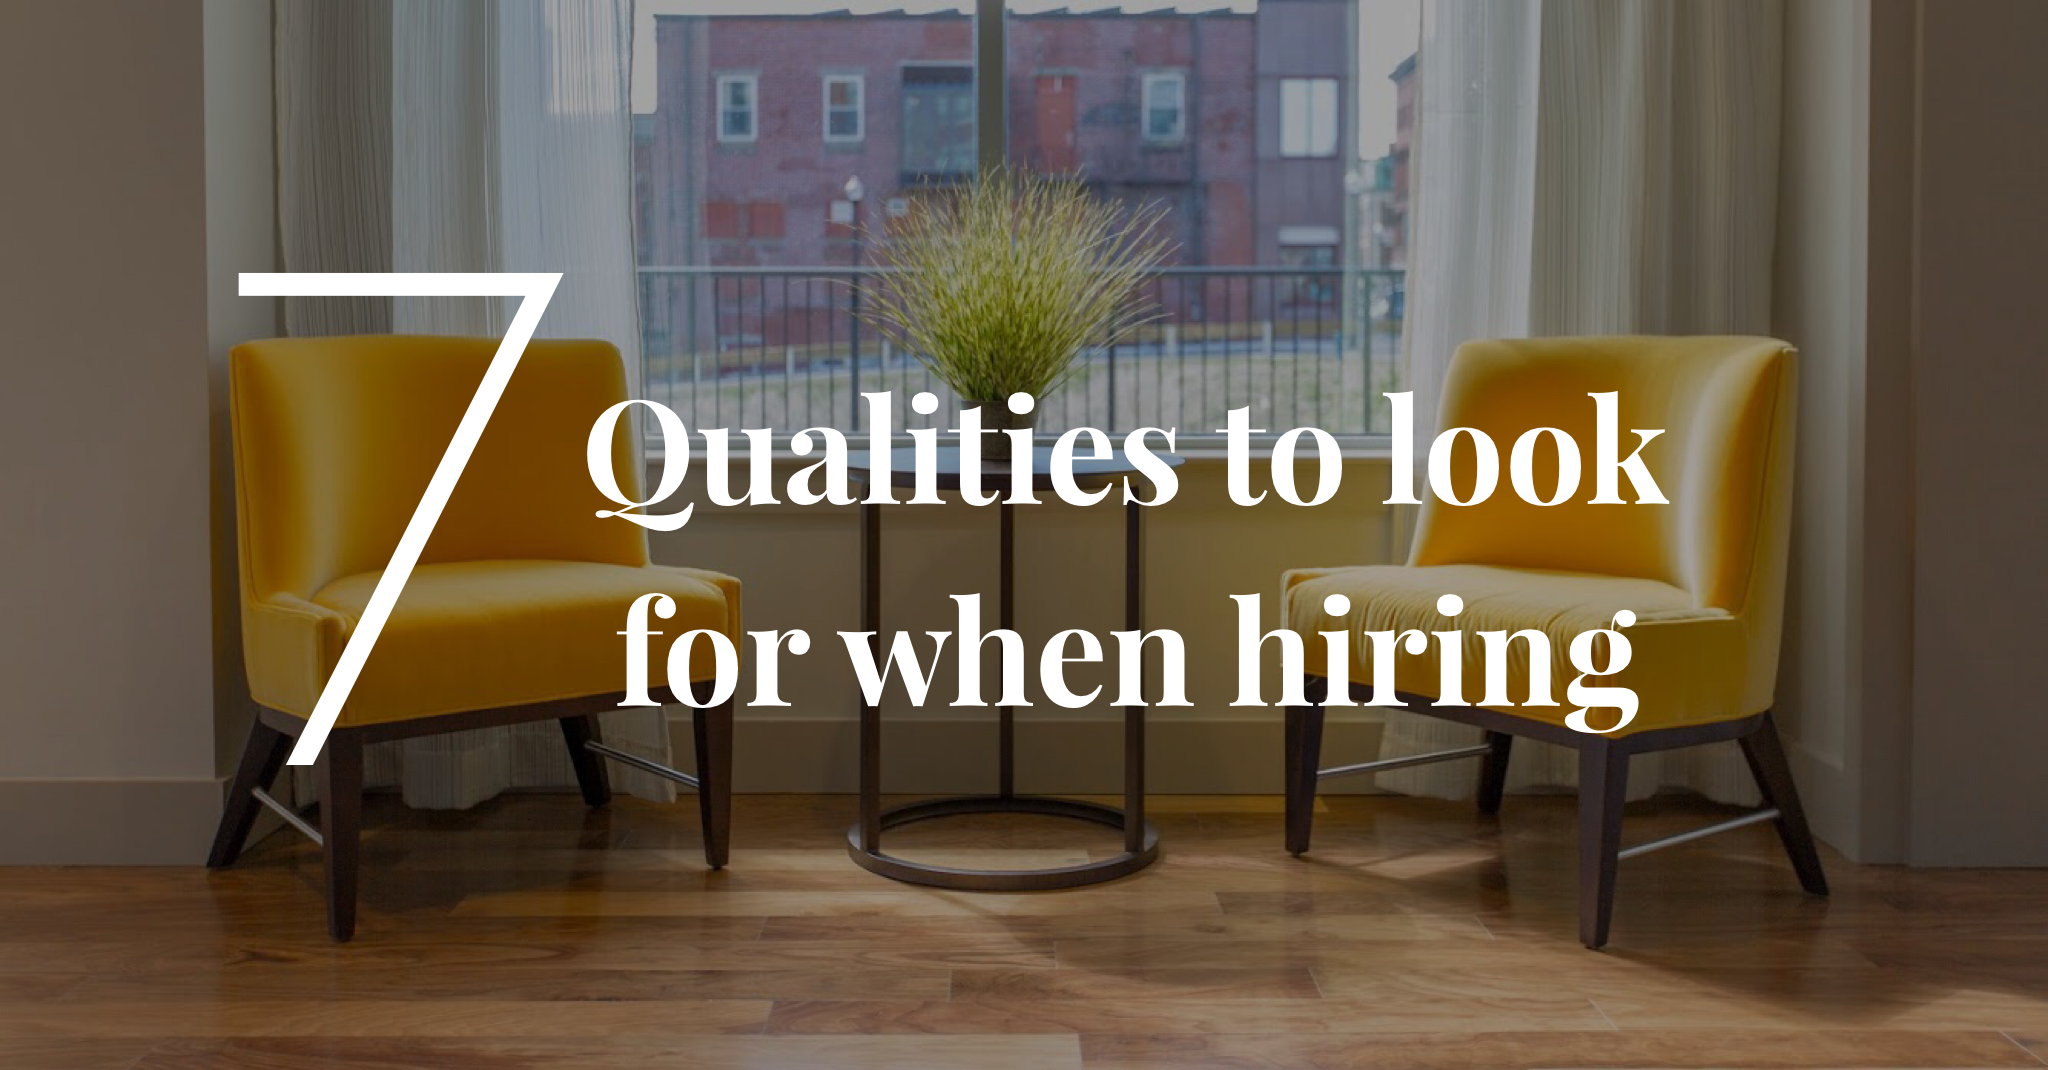 7 Qualities To Look For When Hiring A New Employee